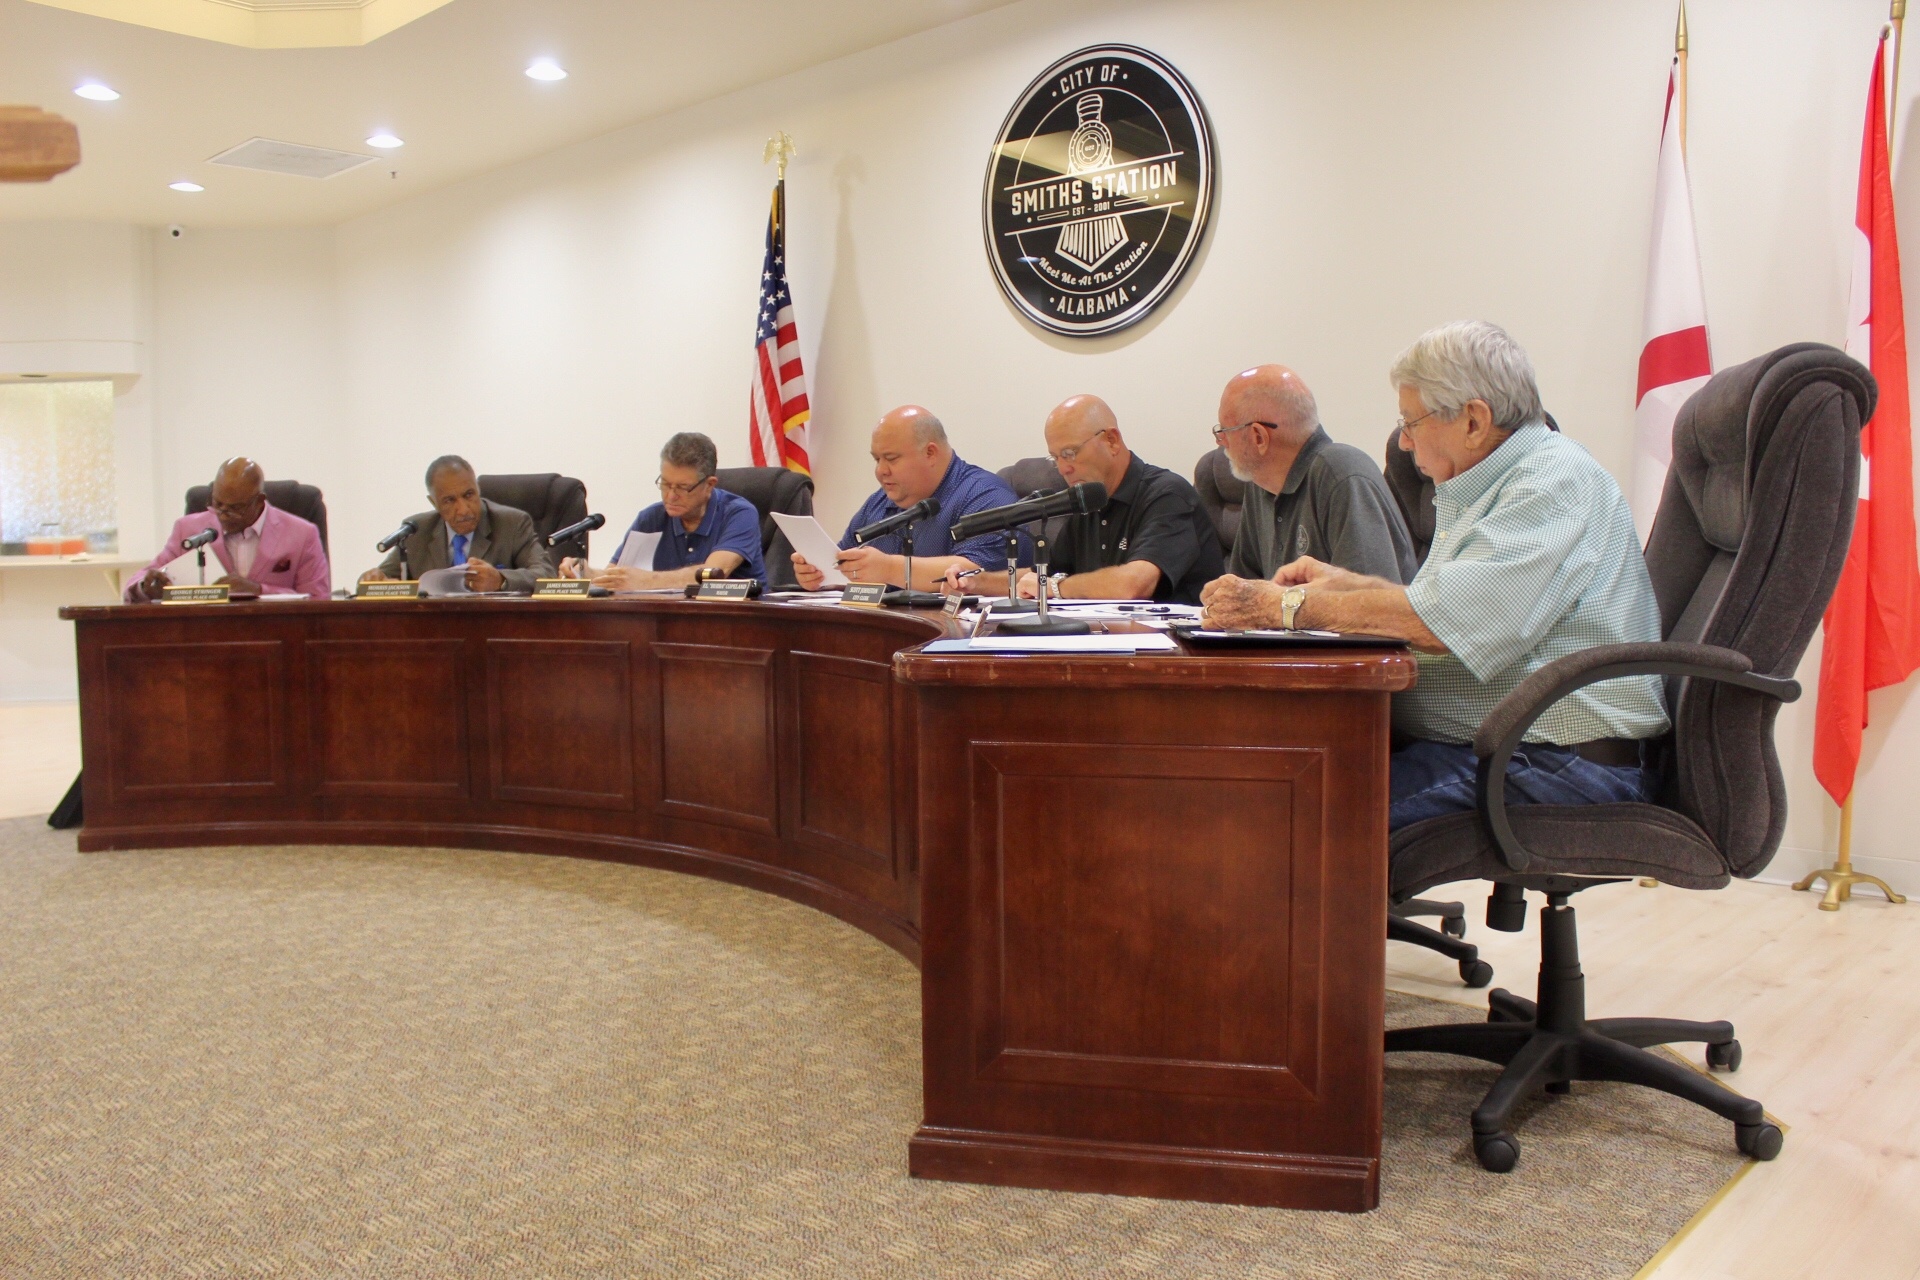 Smiths Station City Council recognize two prominent citizens with mayoral proclamations during last meeting